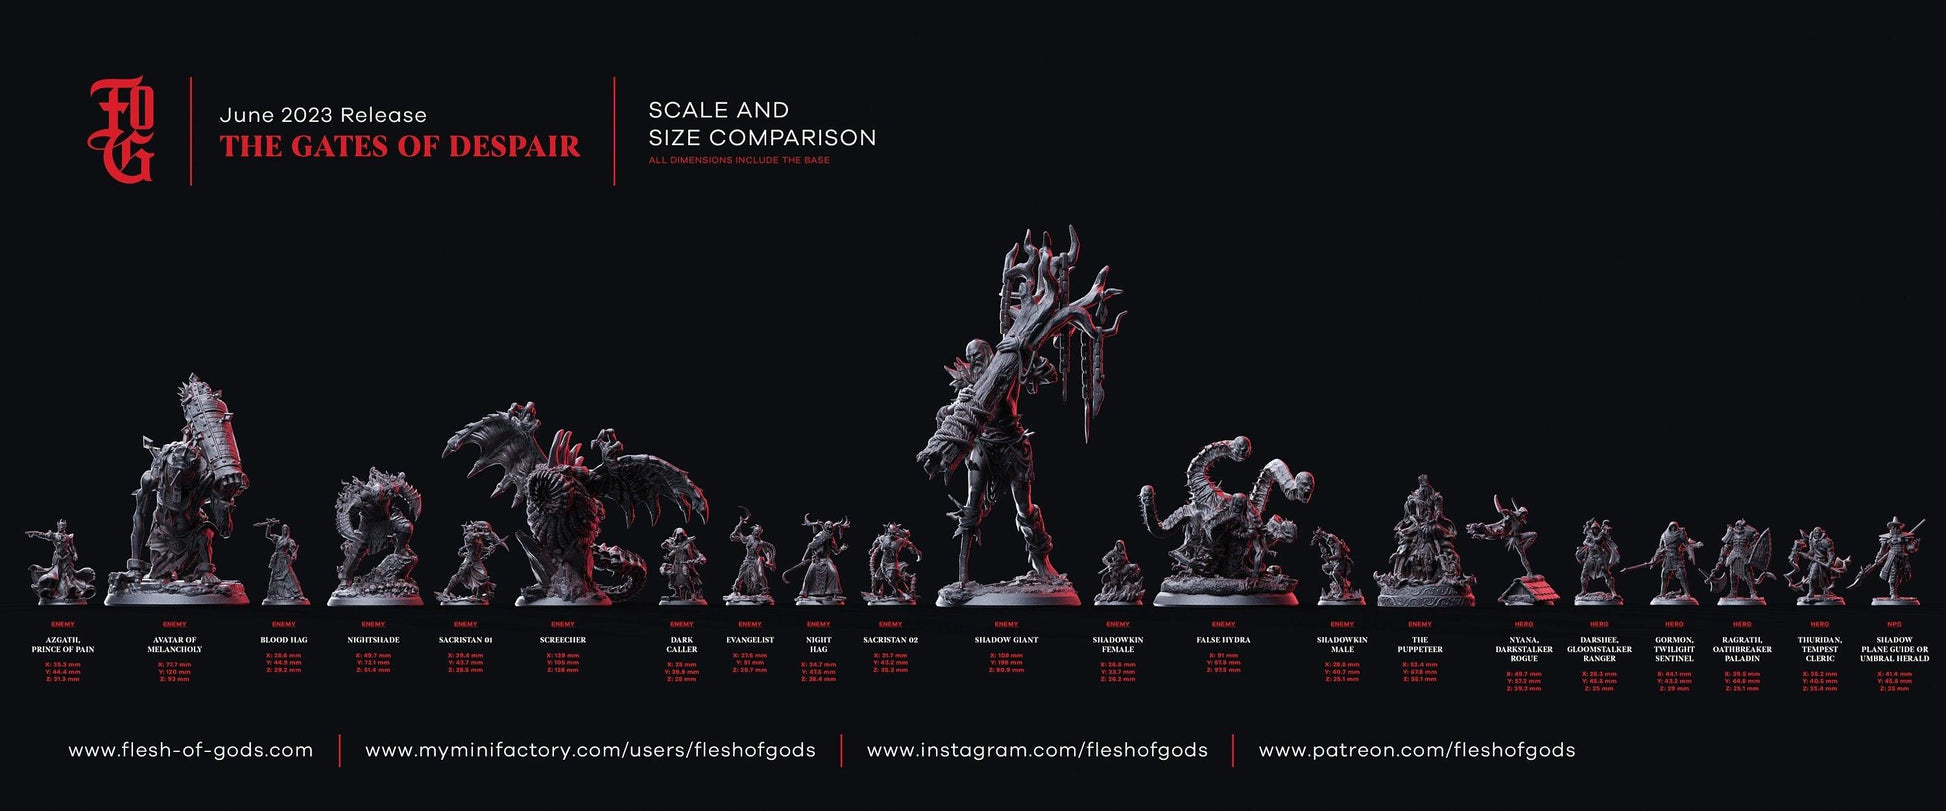 Blood Hag Miniature | Witch Figurine Dungeons and Dragons DnD 5e | 32mm Scale - Plague Miniatures shop for DnD Miniatures